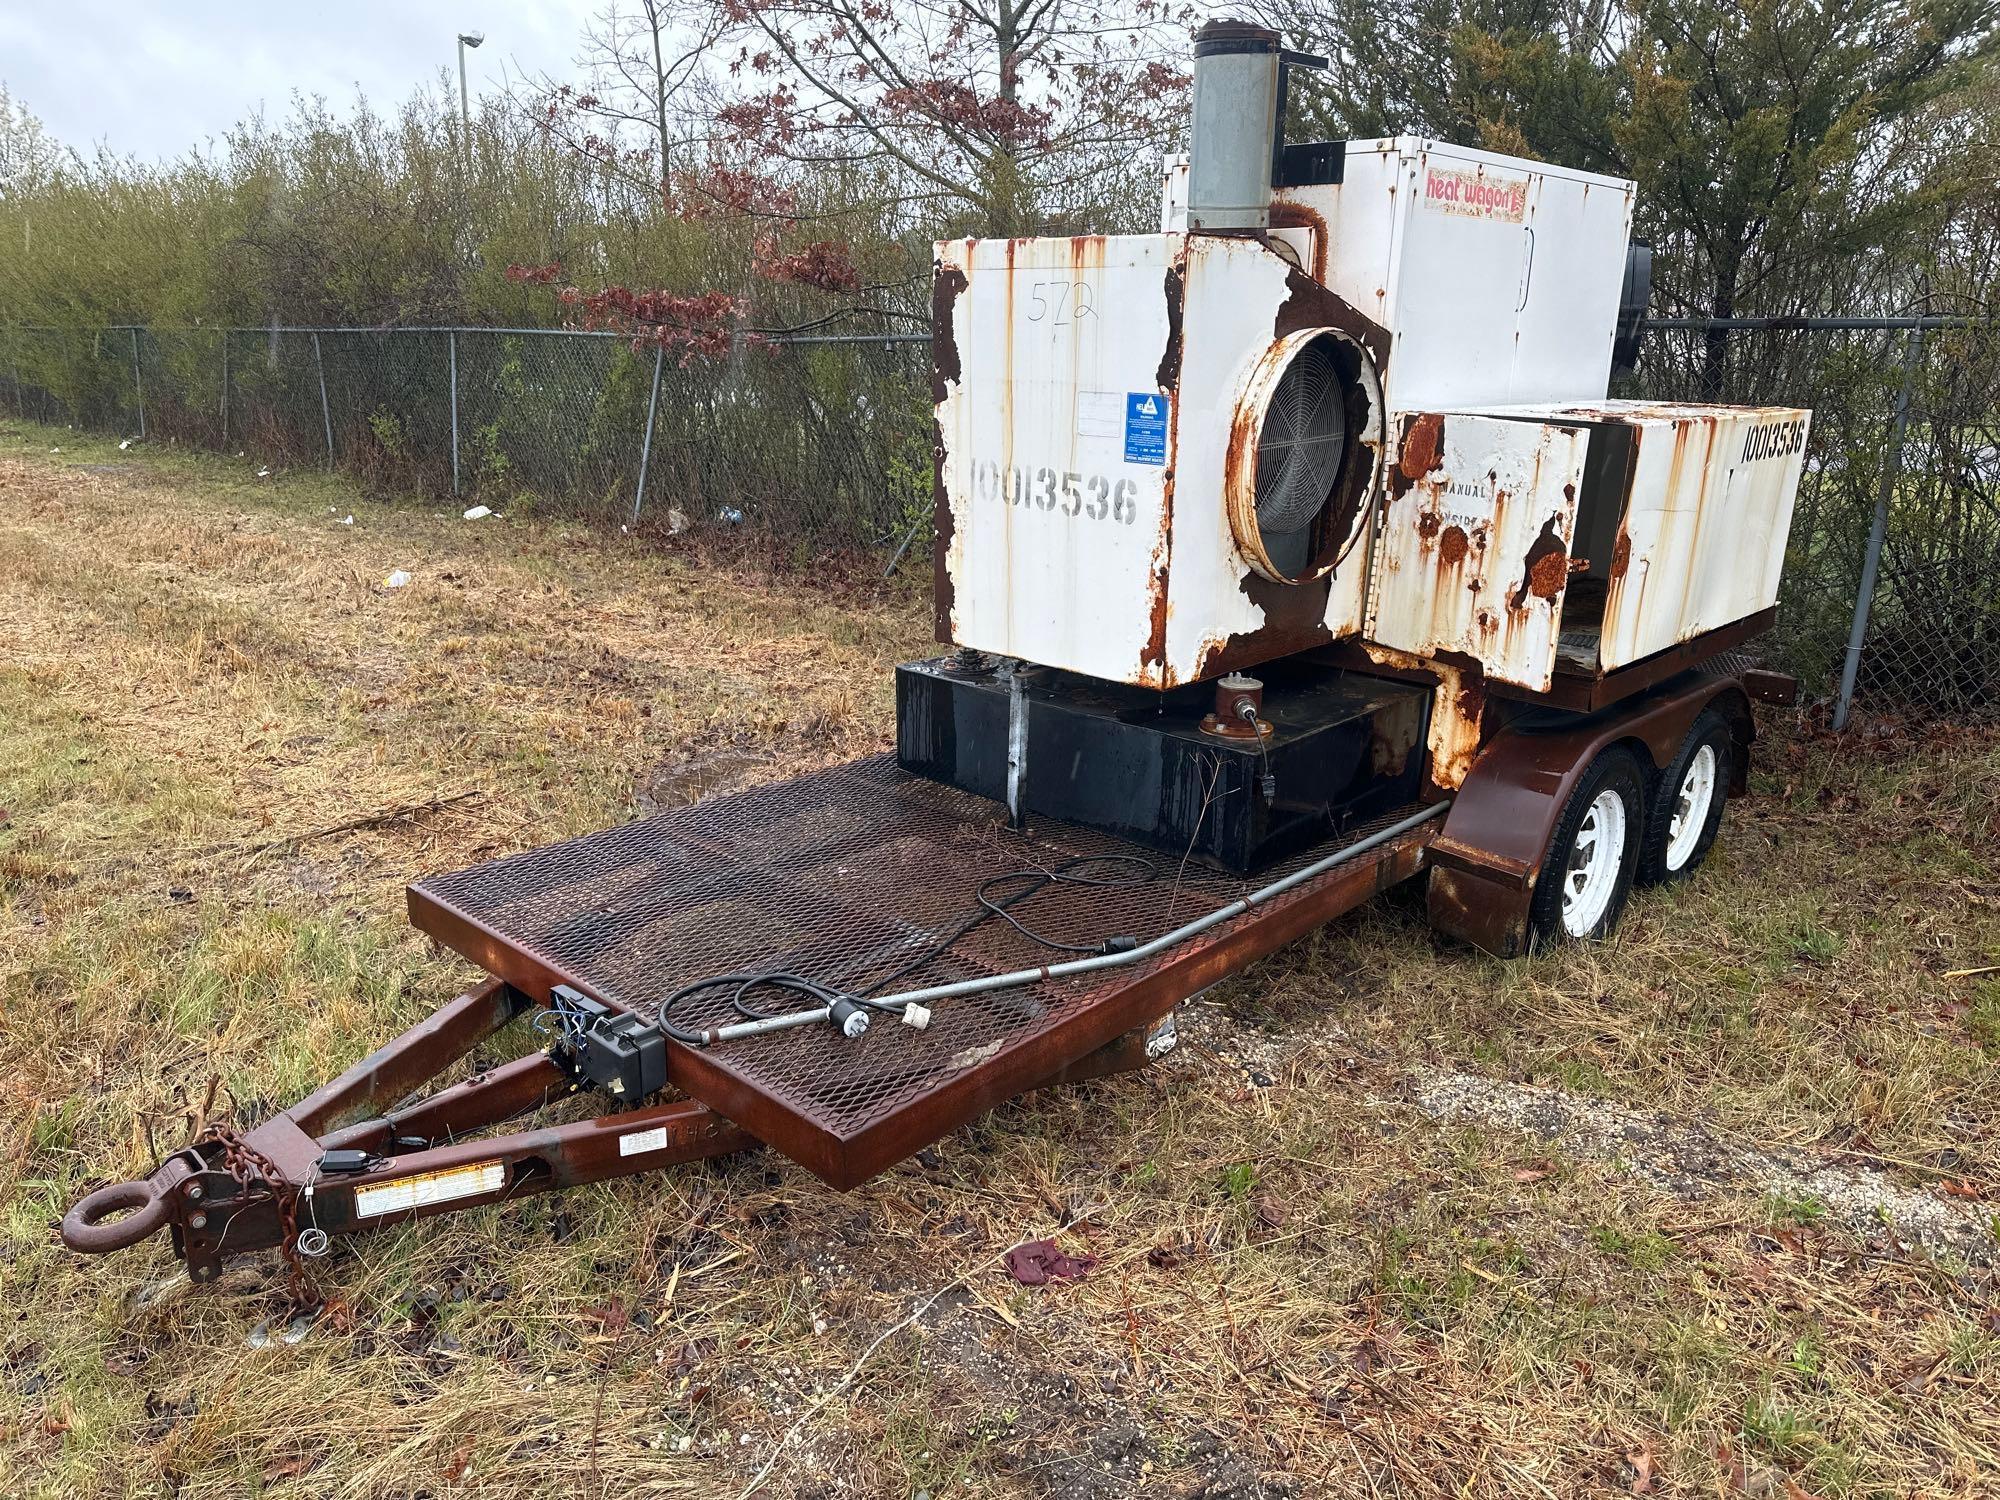 MULTIQUIP HEAT WAGON HEATING EQUIPMENT trailer mounted.BOS ONLY... V-94140